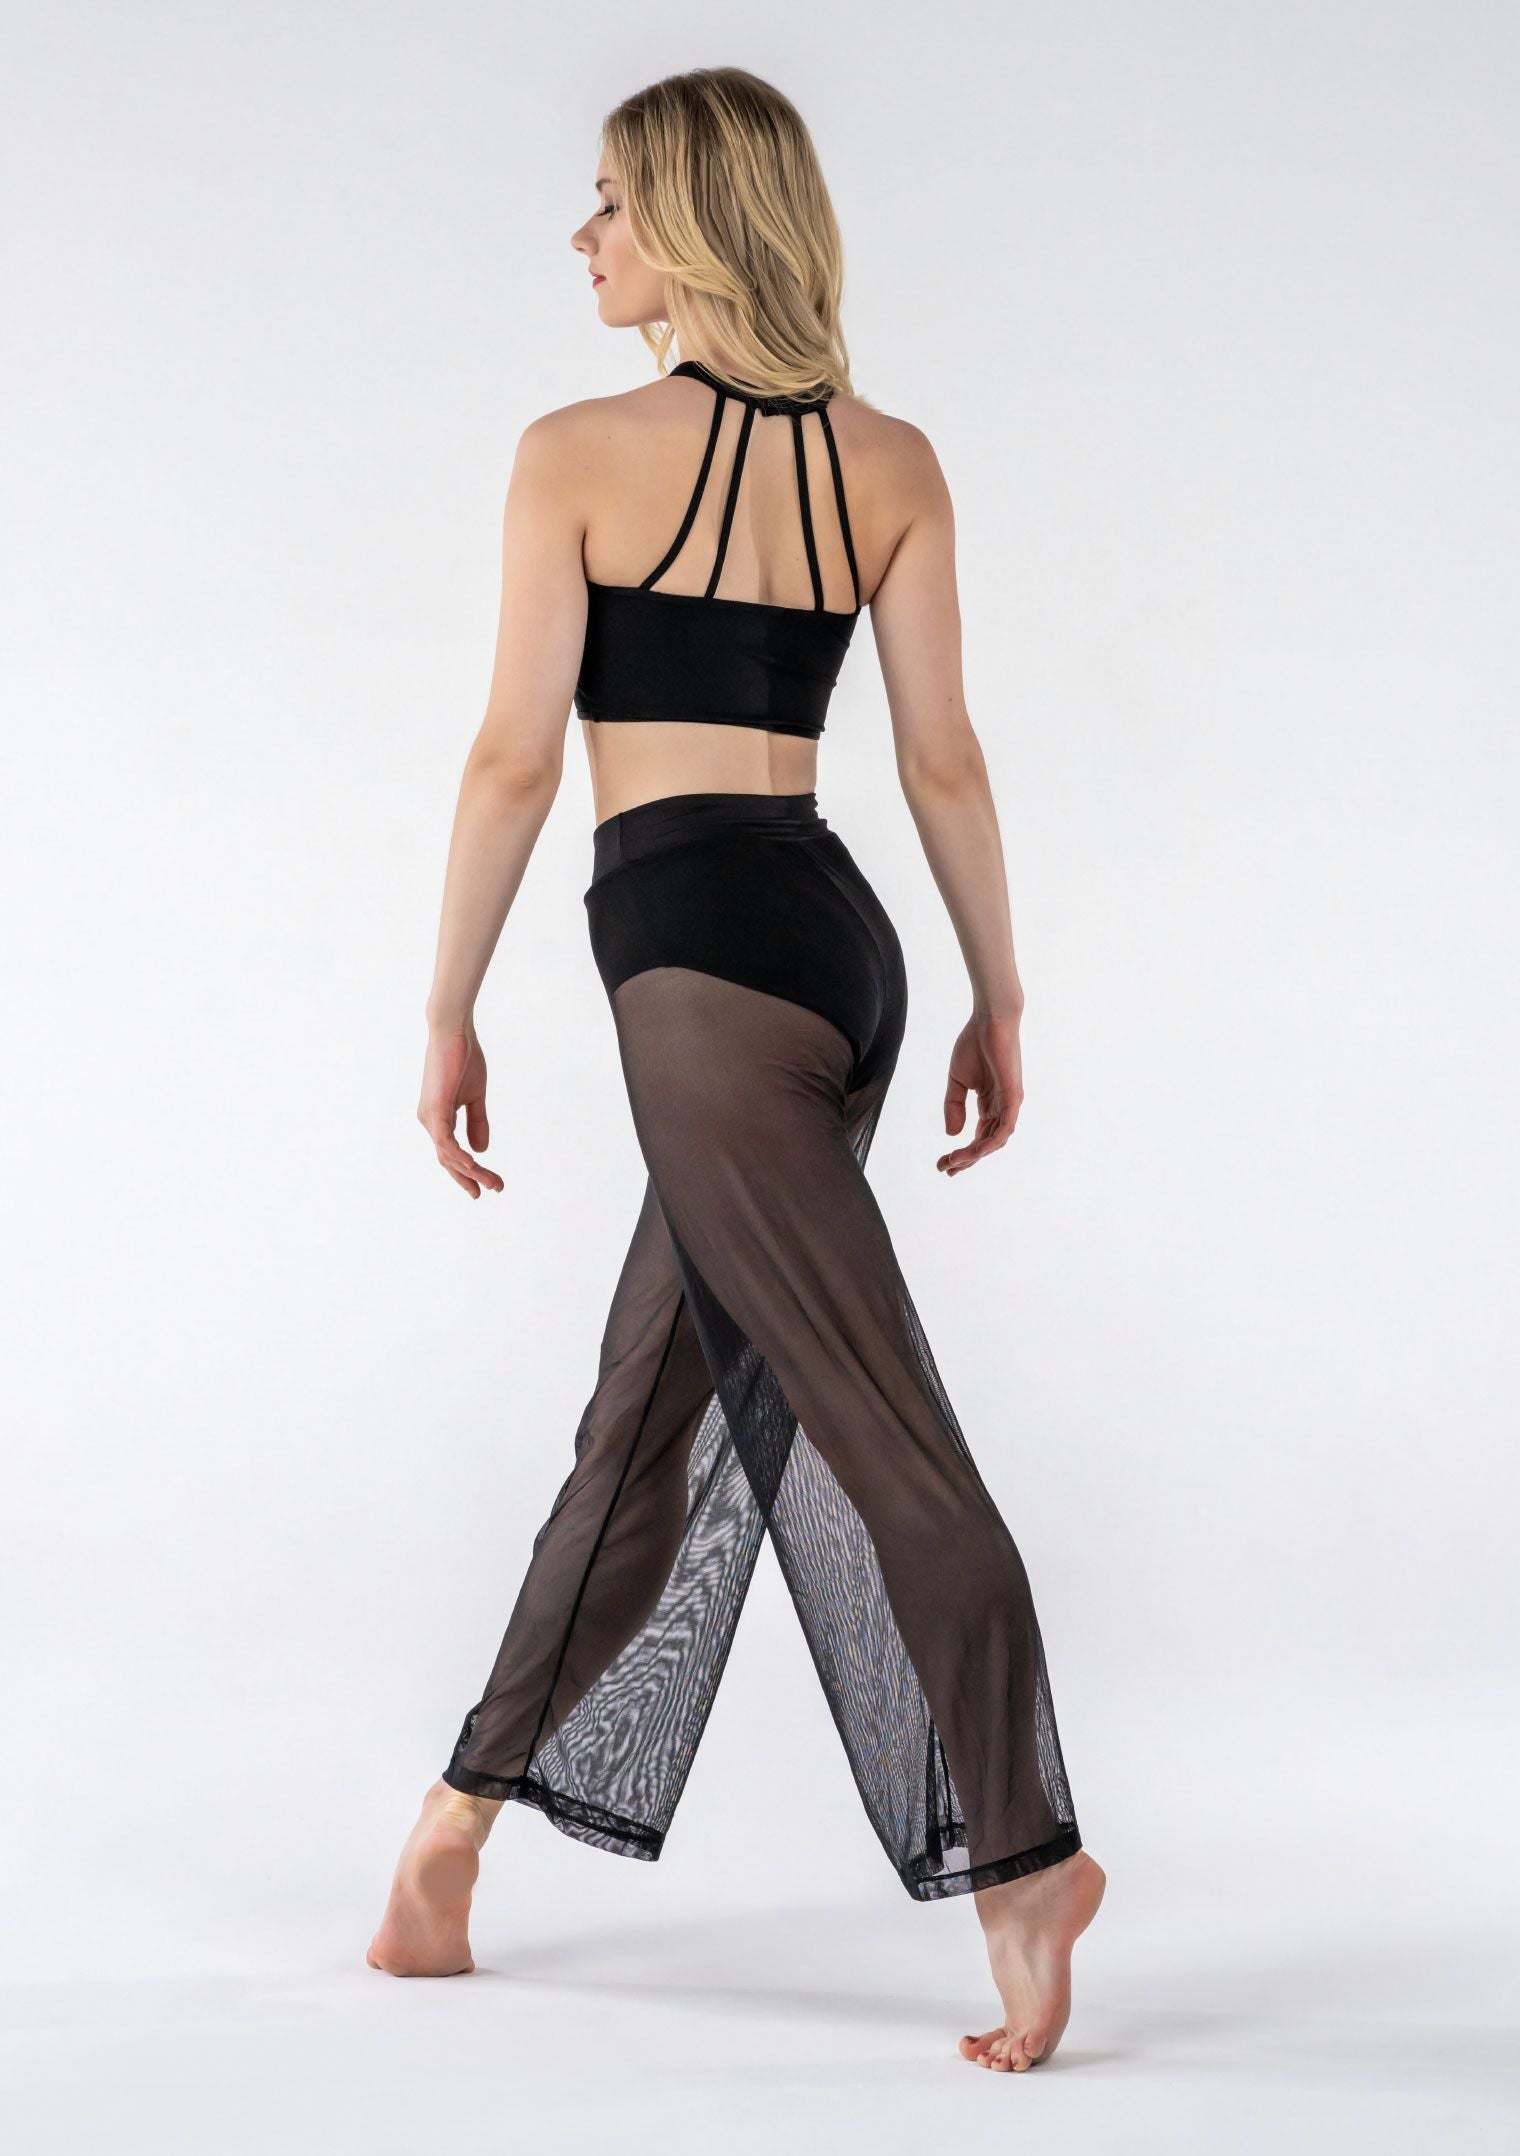 Contemporary Dance Costume, Lyrical Dance Costume, Sheer Pants, Chiffon  Pole Pants, Contemporary Pants, Sheer Trousers for Dancing for Pole -   Canada